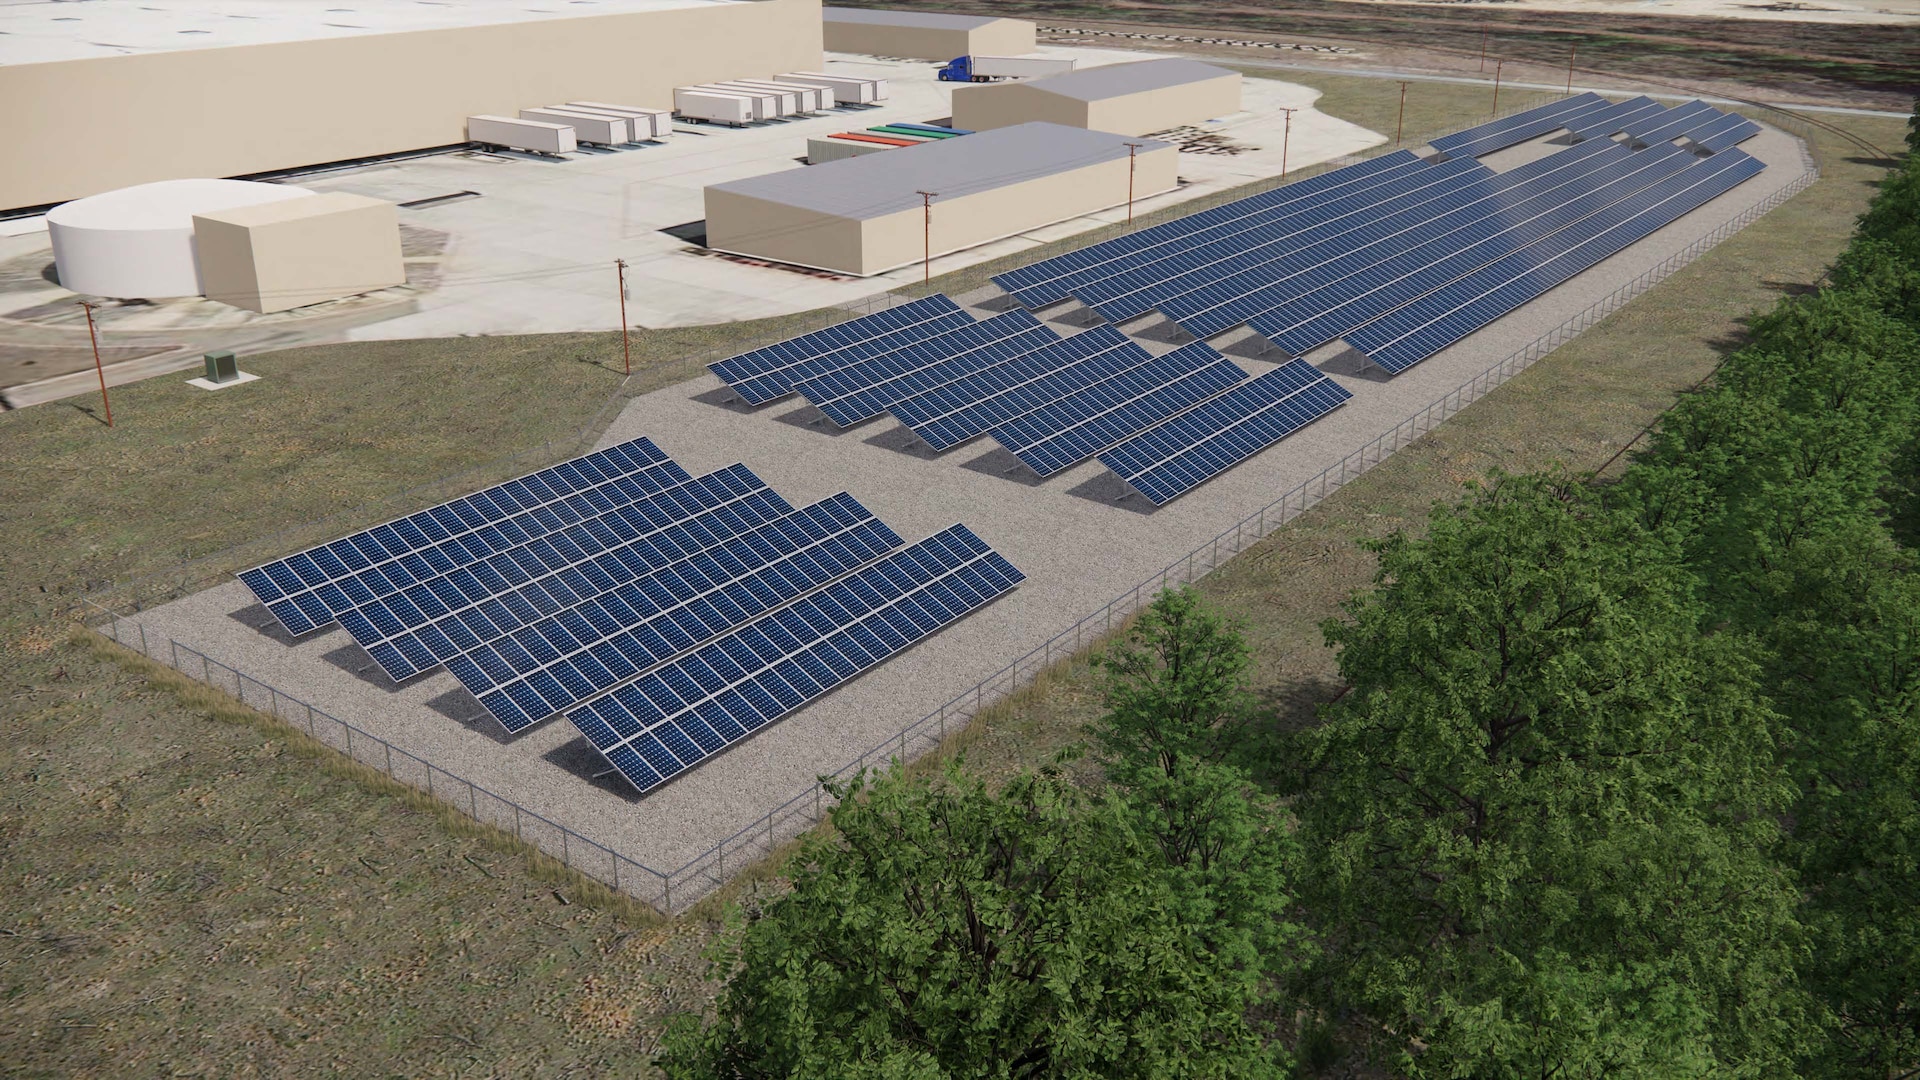 Rendered image of solar panel installation.